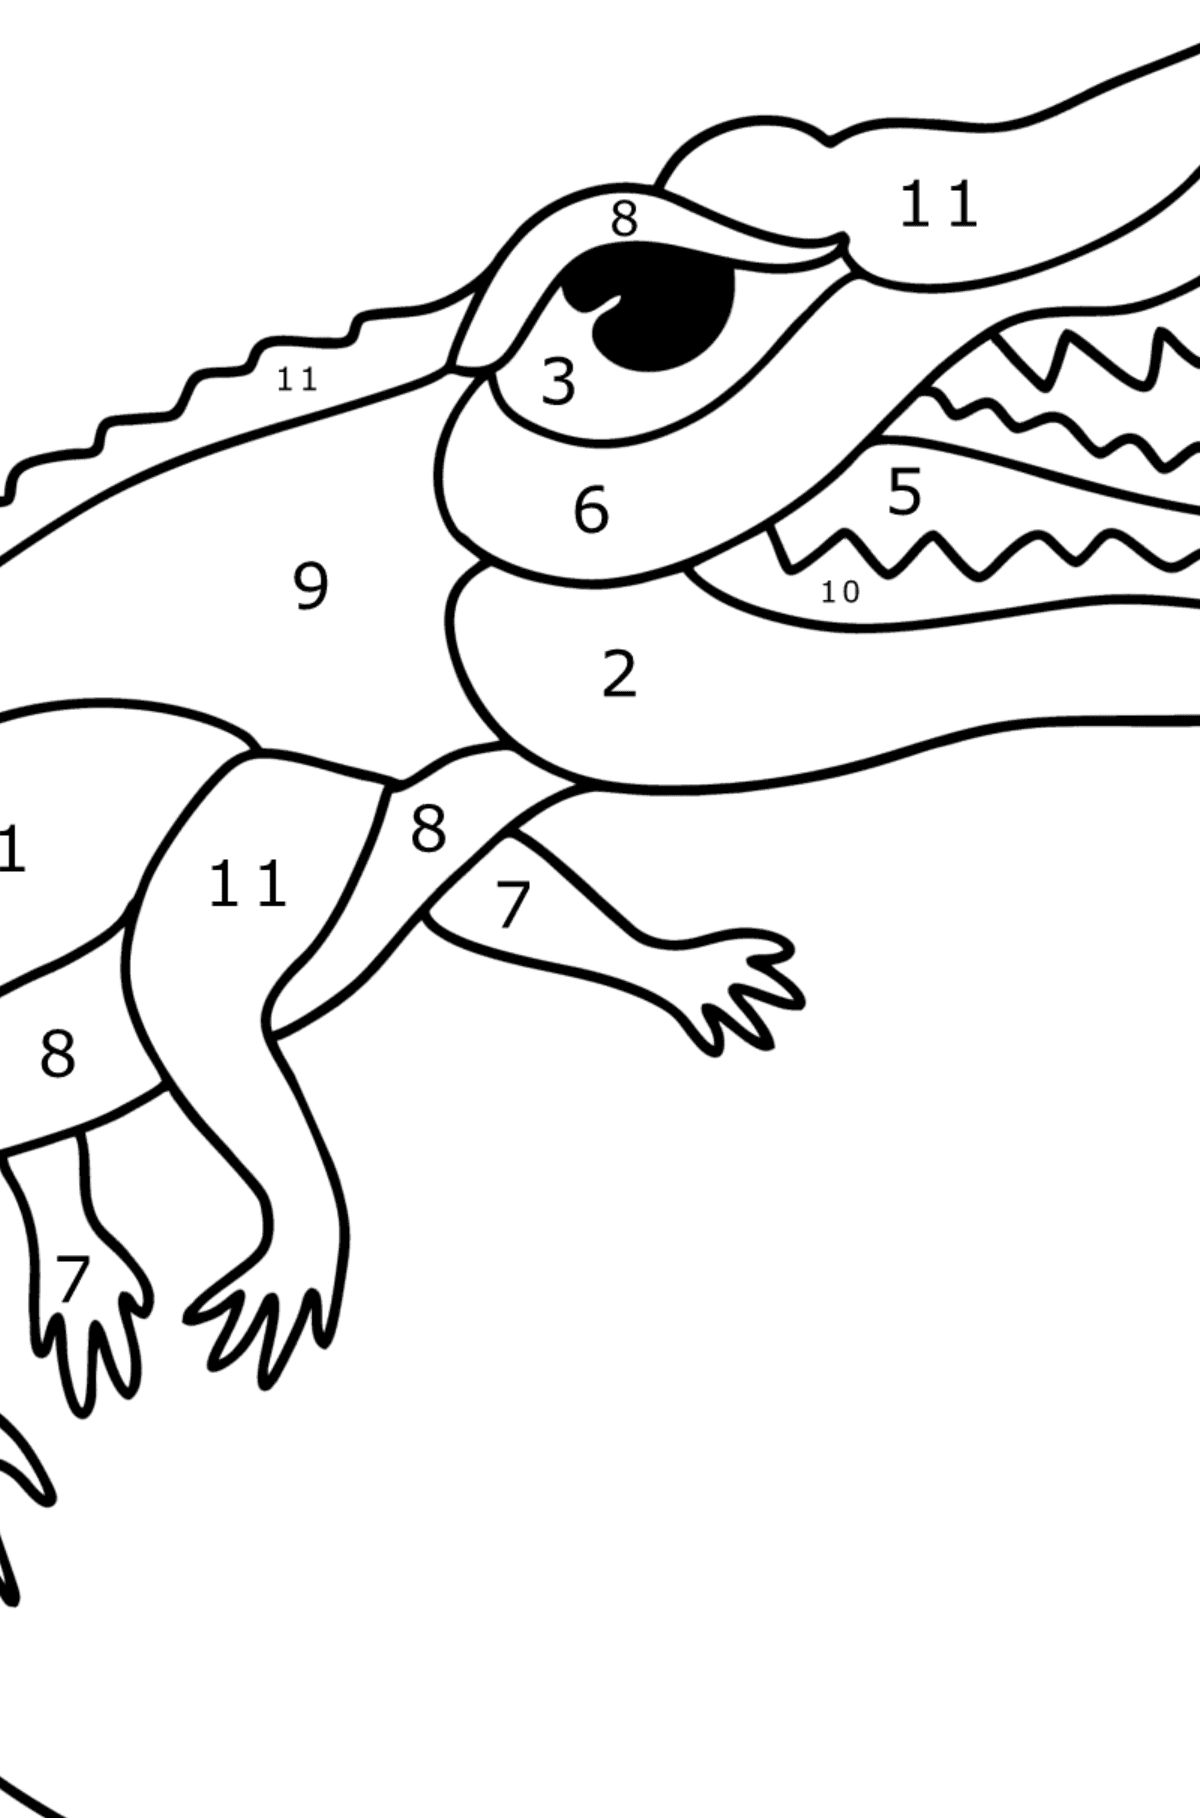 Saltwater Crocodile сoloring page - Coloring by Numbers for Kids